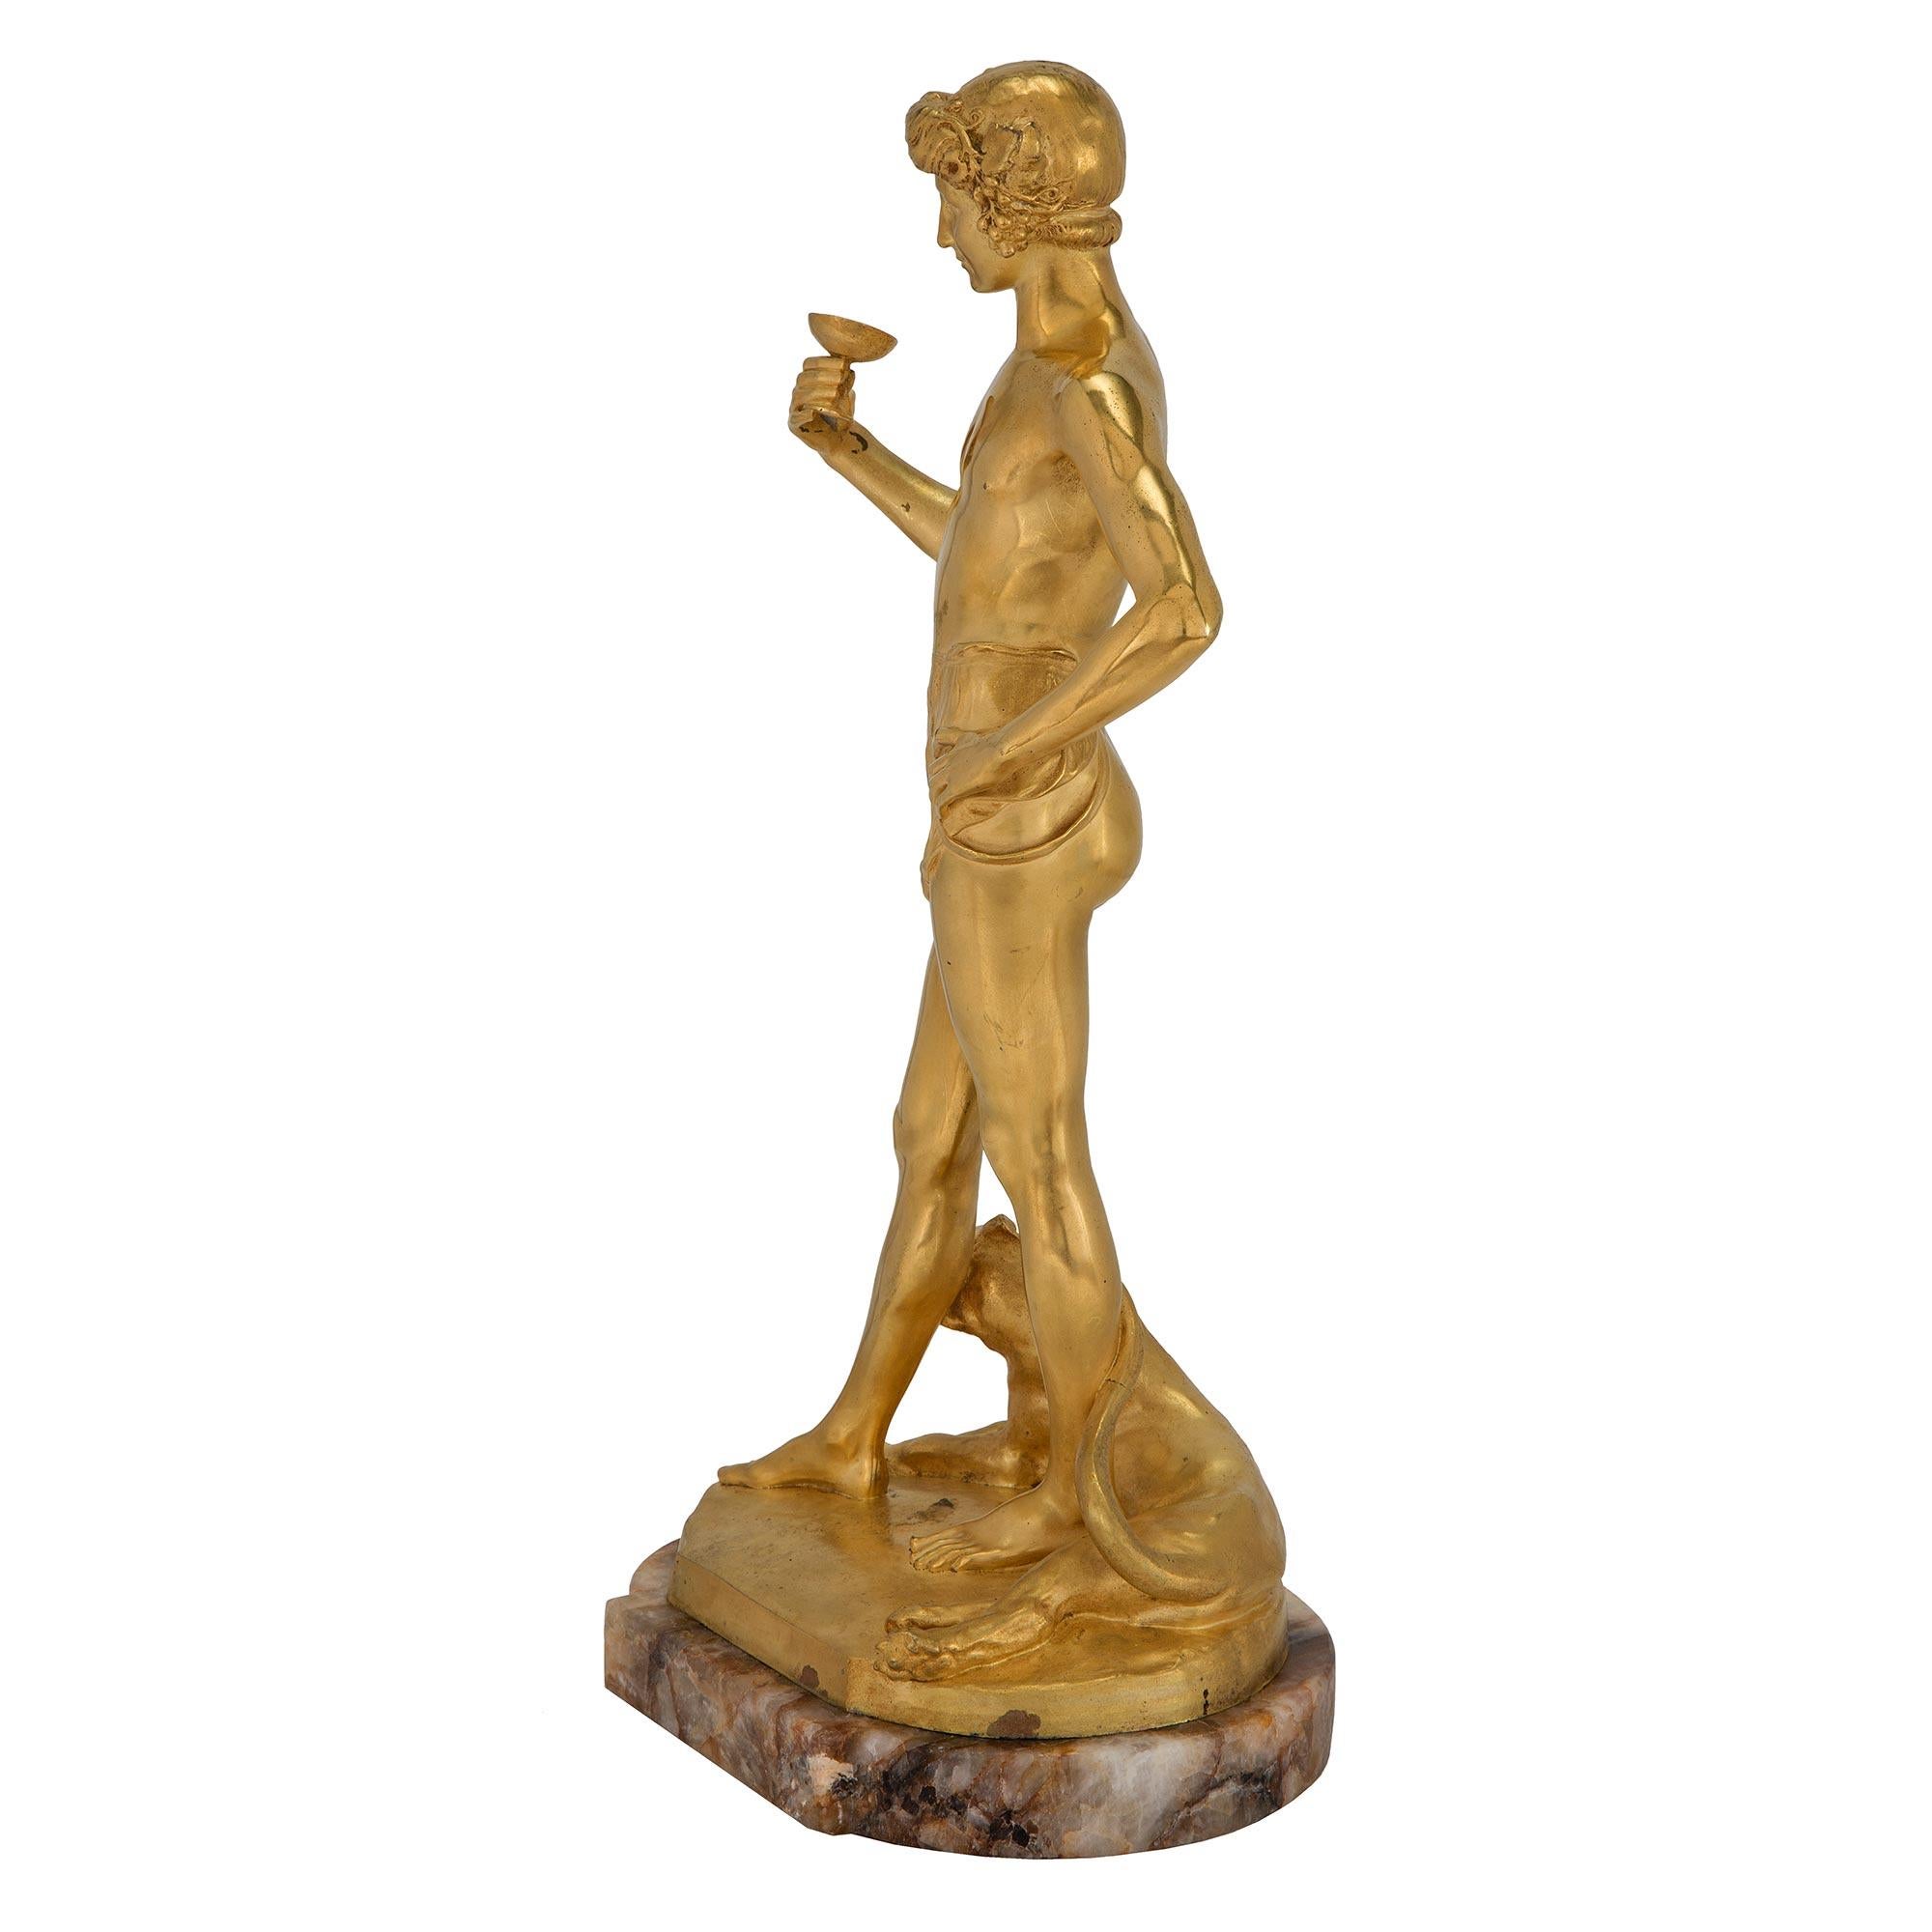 An elegant and high quality French 19th century neo-classical st. ormolu and quartz statue signed Jean-Antonin Carlès, 519A Siot-Paris. This statue is named Jeune Disciple de Bacchus (Baccchus' Young Disciple) and is raised by an onyx base which